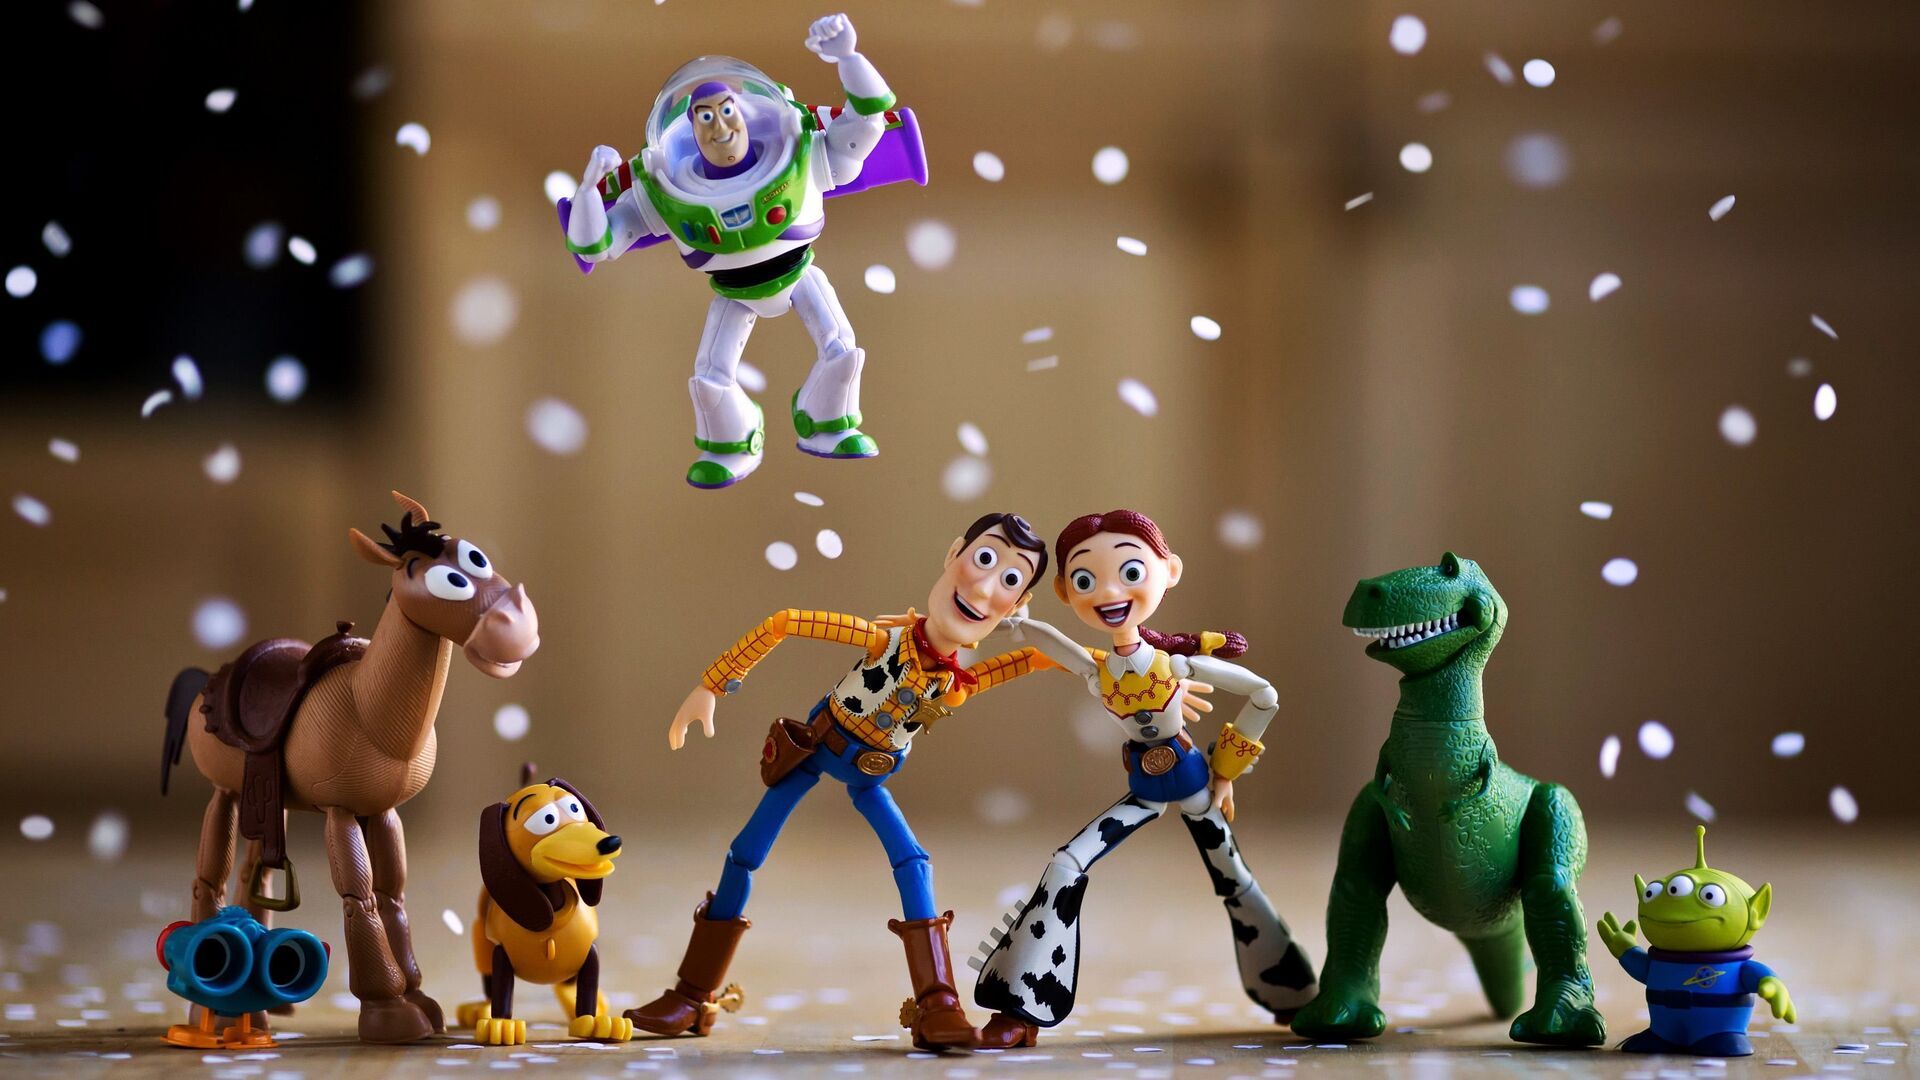 Toy Story Laptop Wallpaper Free Toy Story Laptop Background